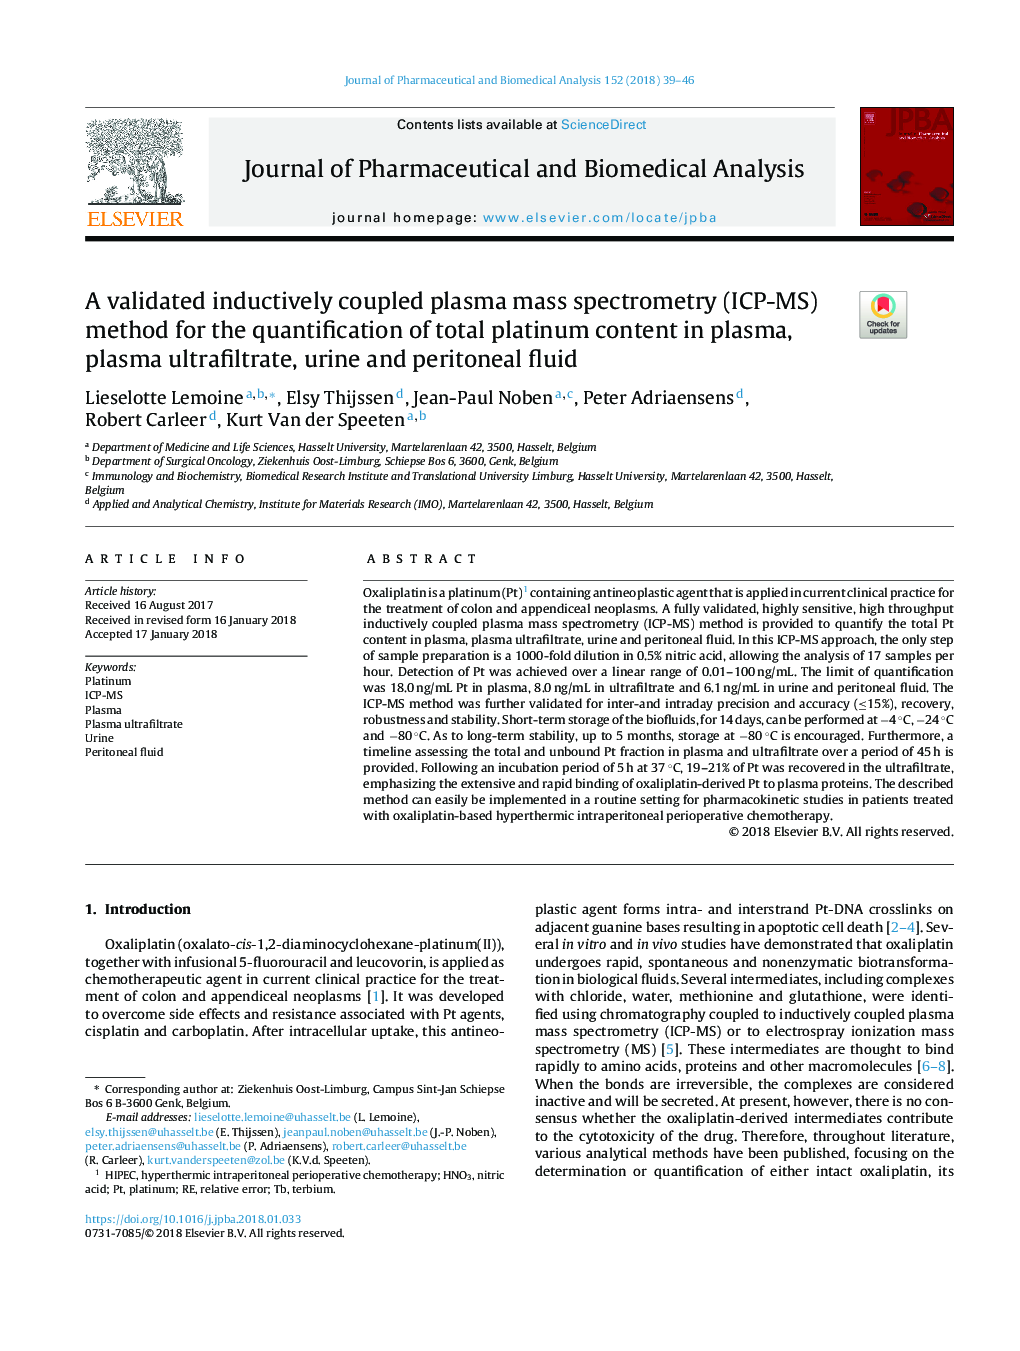 A validated inductively coupled plasma mass spectrometry (ICP-MS) method for the quantification of total platinum content in plasma, plasma ultrafiltrate, urine and peritoneal fluid